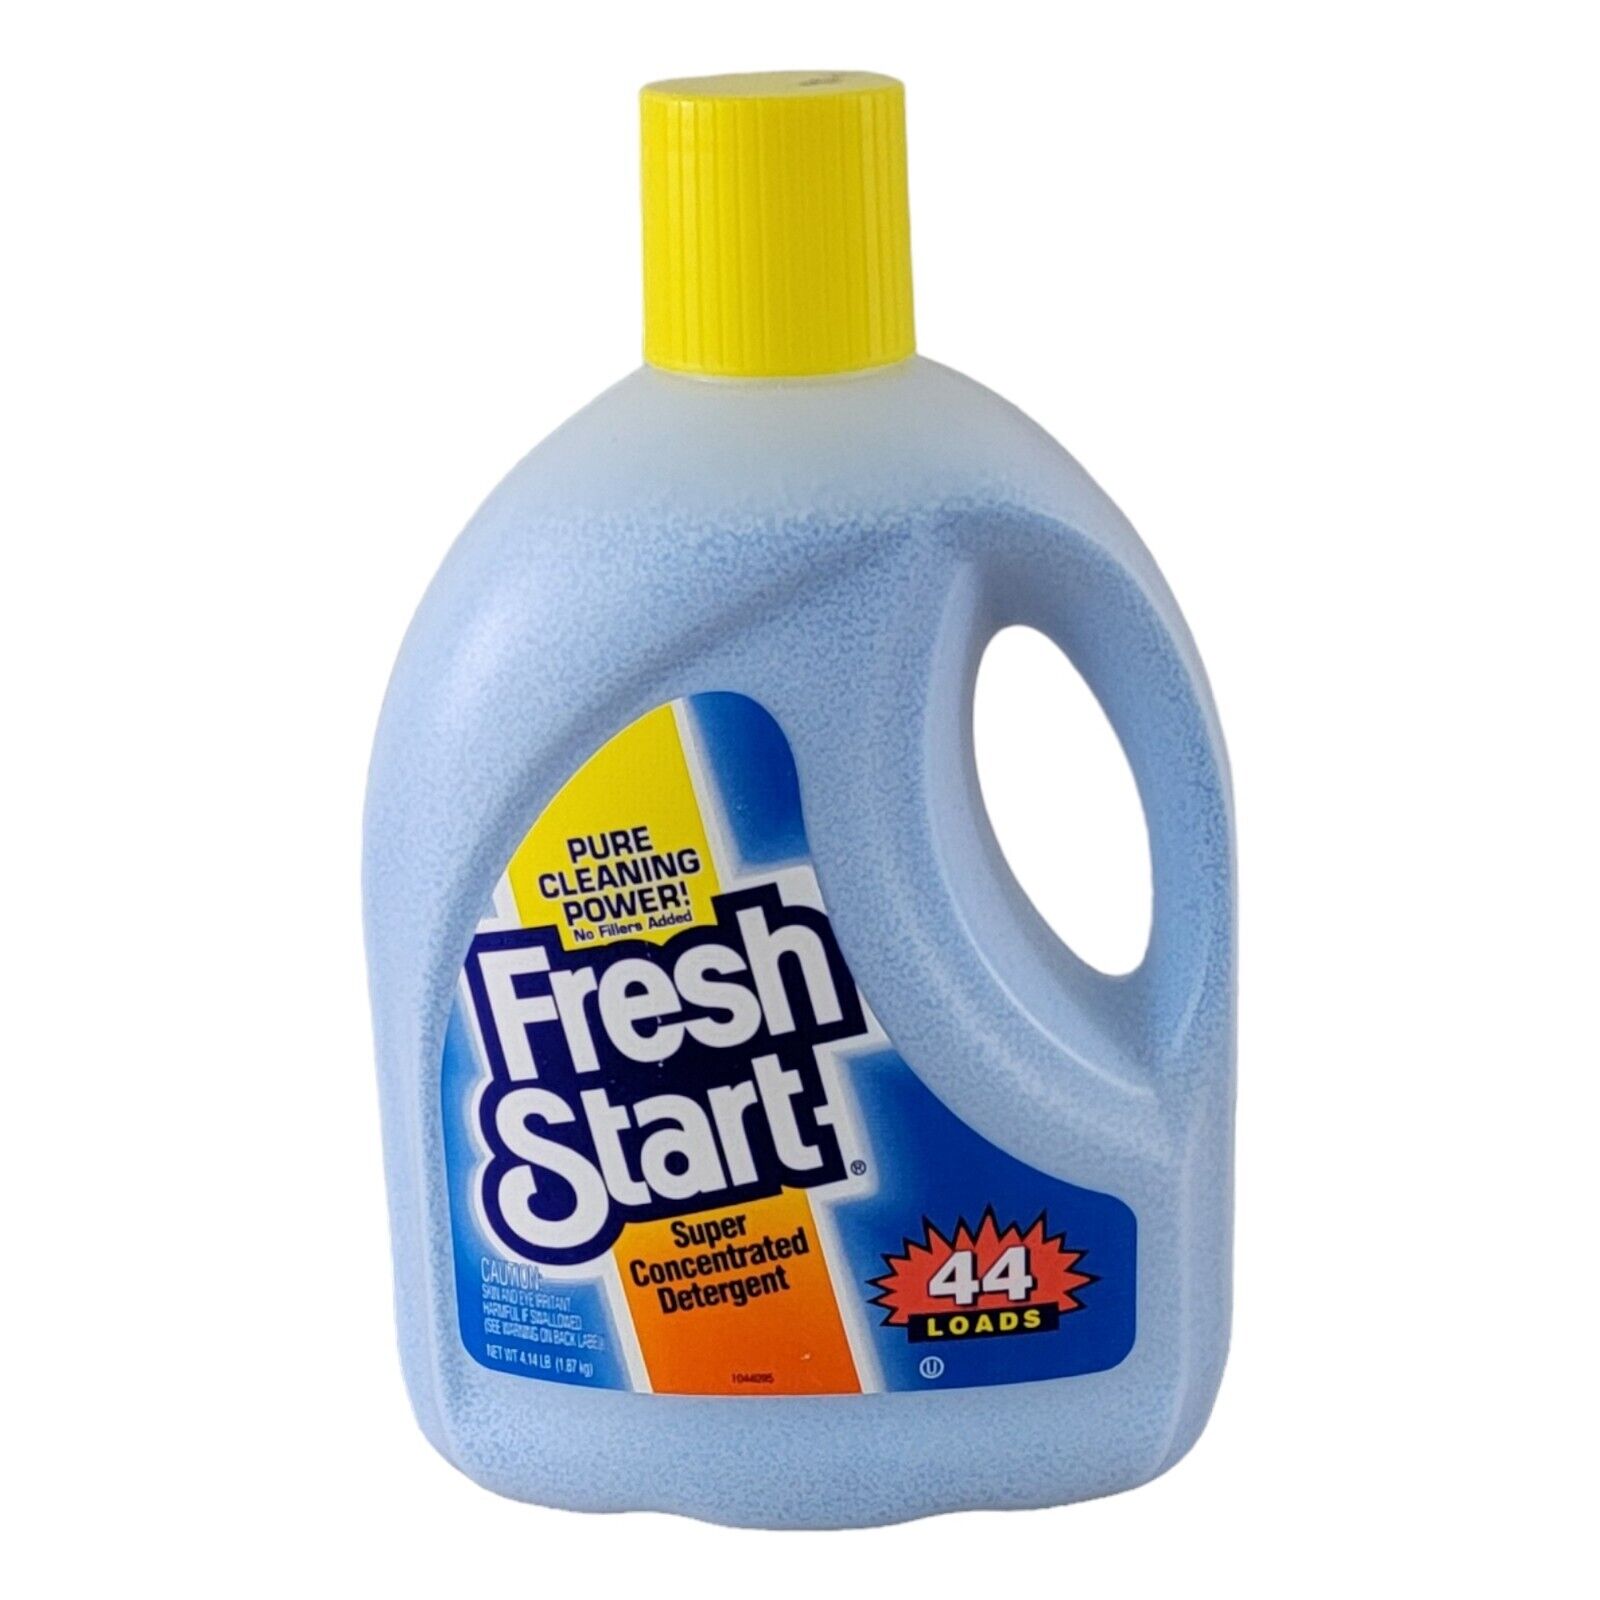 Fresh Start Concentrated Laundry Detergent Powder 44 Load 4.14lb Discontinued